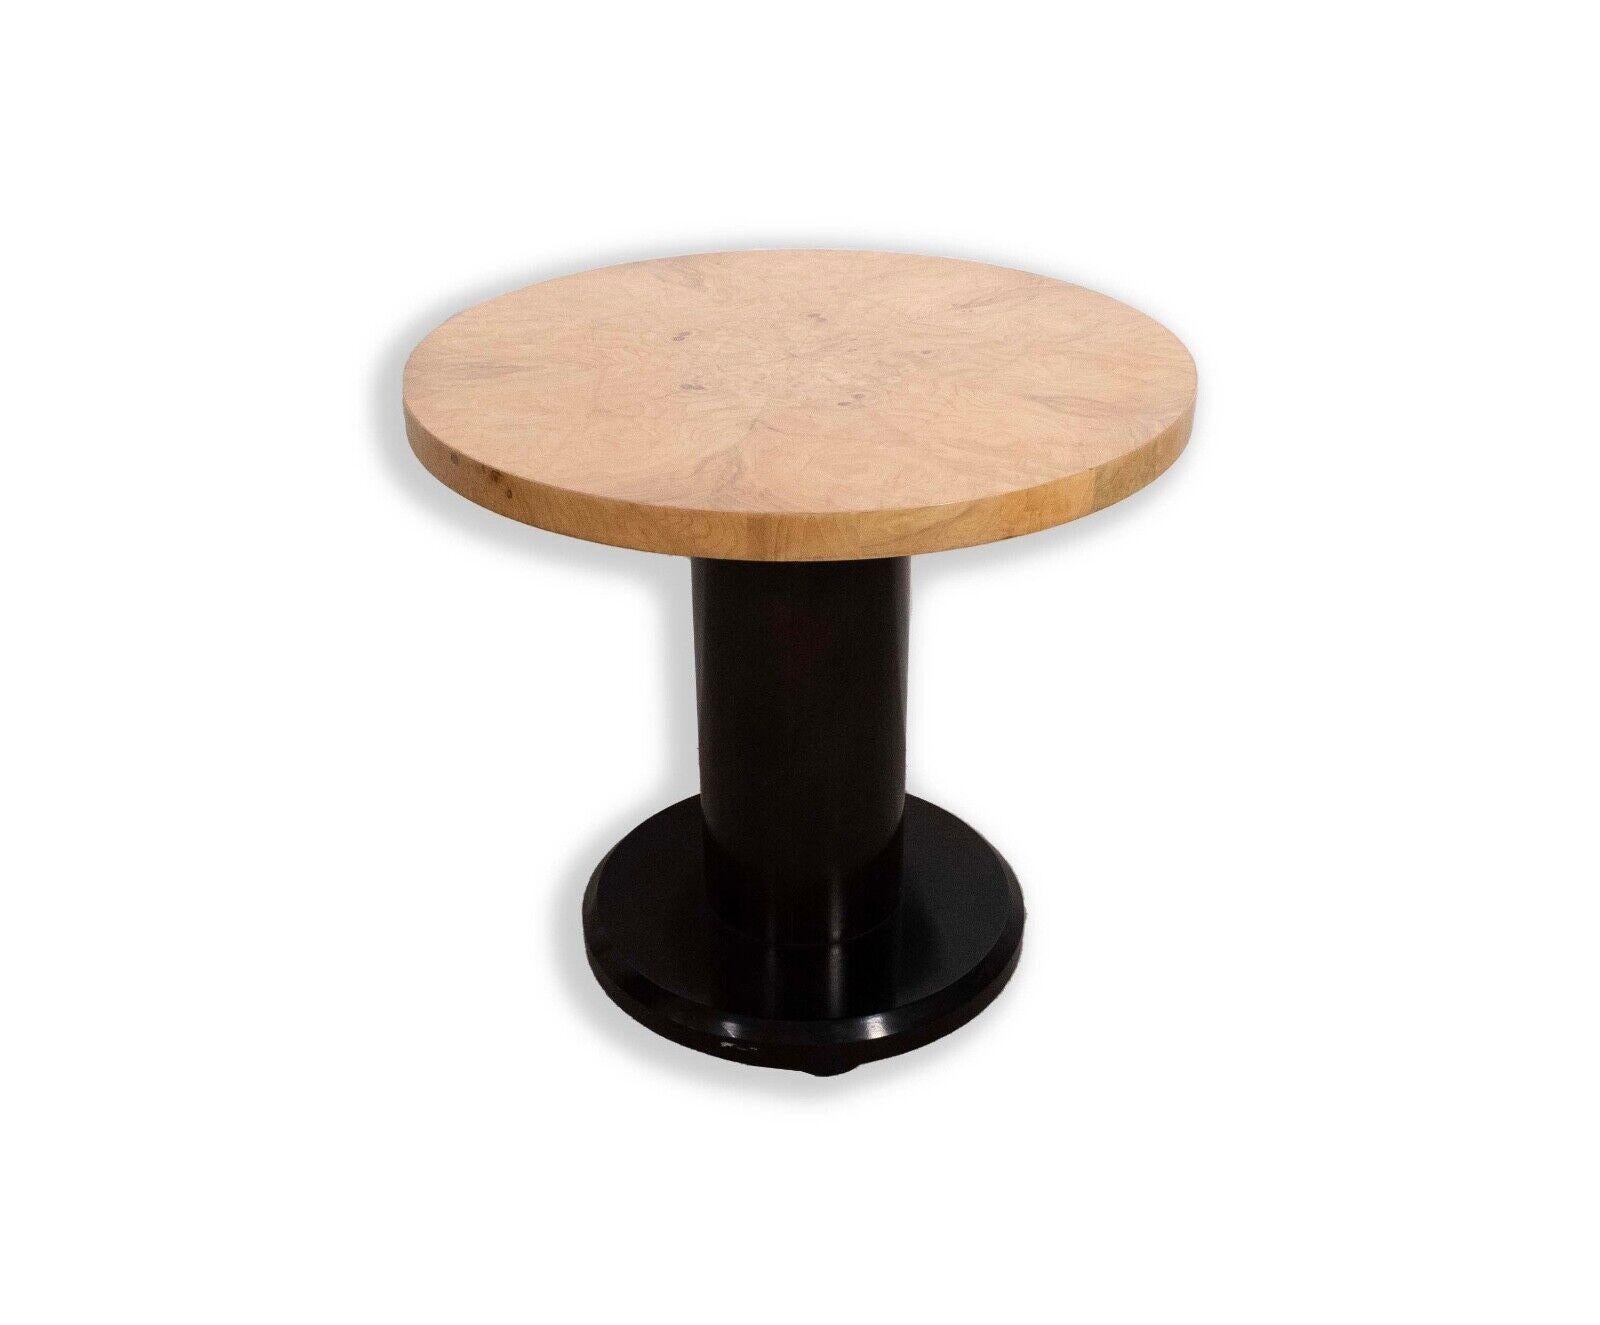 Introducing the Henredon Scene Two Olivewood Burlwood Side End Table, a stunning piece of mid-century modern furniture that will add a touch of elegance to any home. Crafted from high-quality materials, this table boasts a rich brown color that is